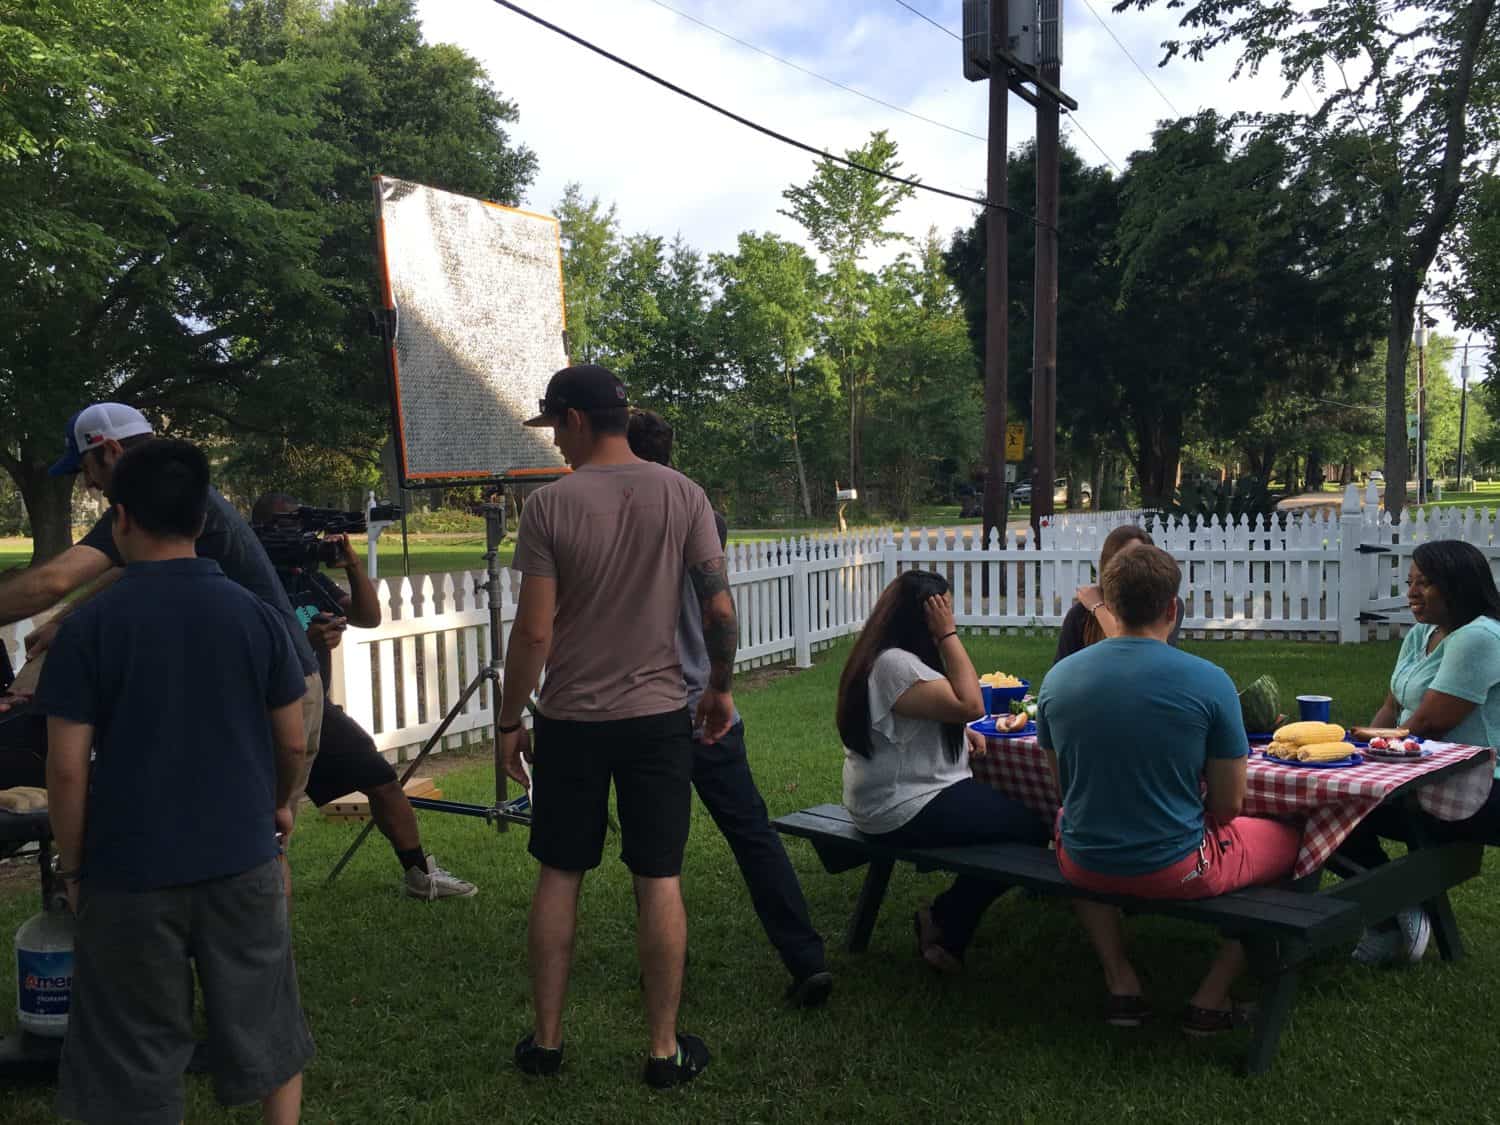 A camera crew films a group of friends eating a picnic